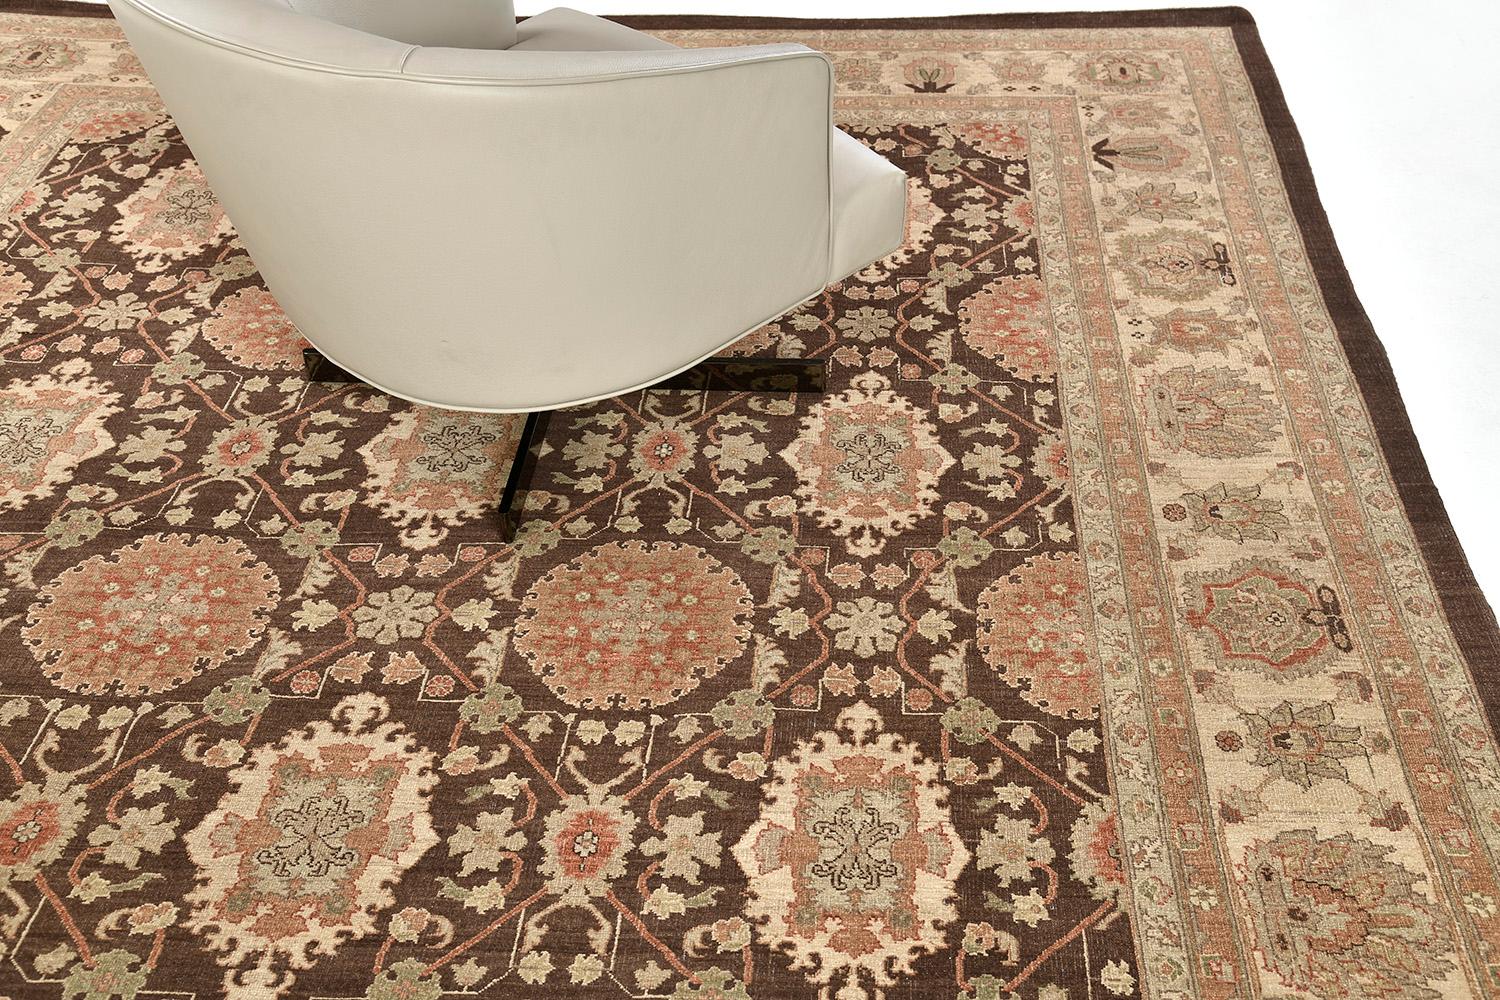 This majestic Mahal rug has created an impressive pattern. Featuring the well-coordinated autumn vibes and the muted palette consisting of sand and tan, this elegant rug is composed of enchanting florid elements forming different grandiose